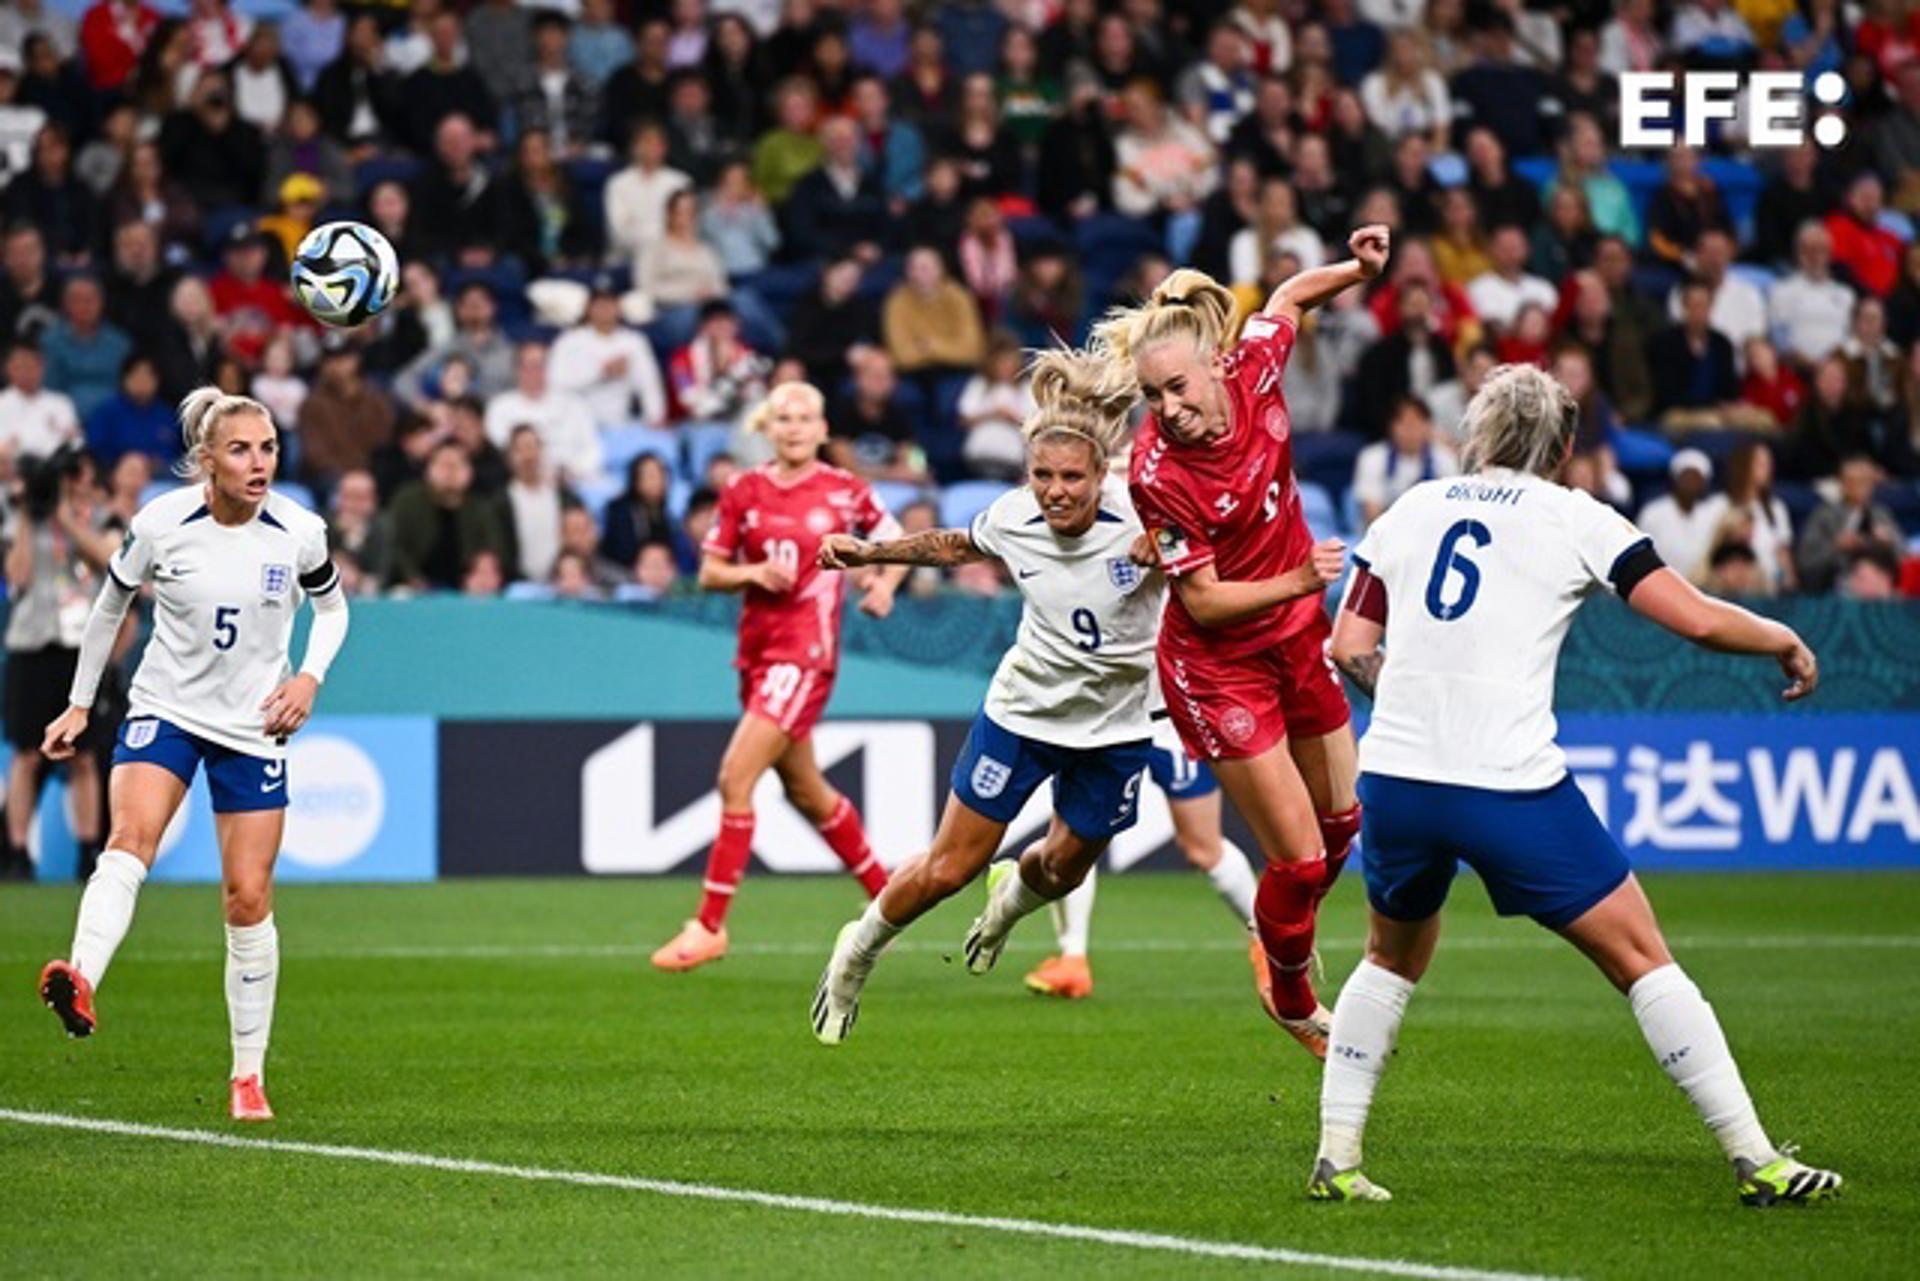 Denmark's Amalie Vangsgaard (R in red) heads the ball toward the England goal during the FIFA Women's World Cup 2023 match in Sydney. EFE/EPA/DAN HIMBRECHTS AUSTRALIA AND NEW ZEALAND OUT EDITORIAL USE ONLY